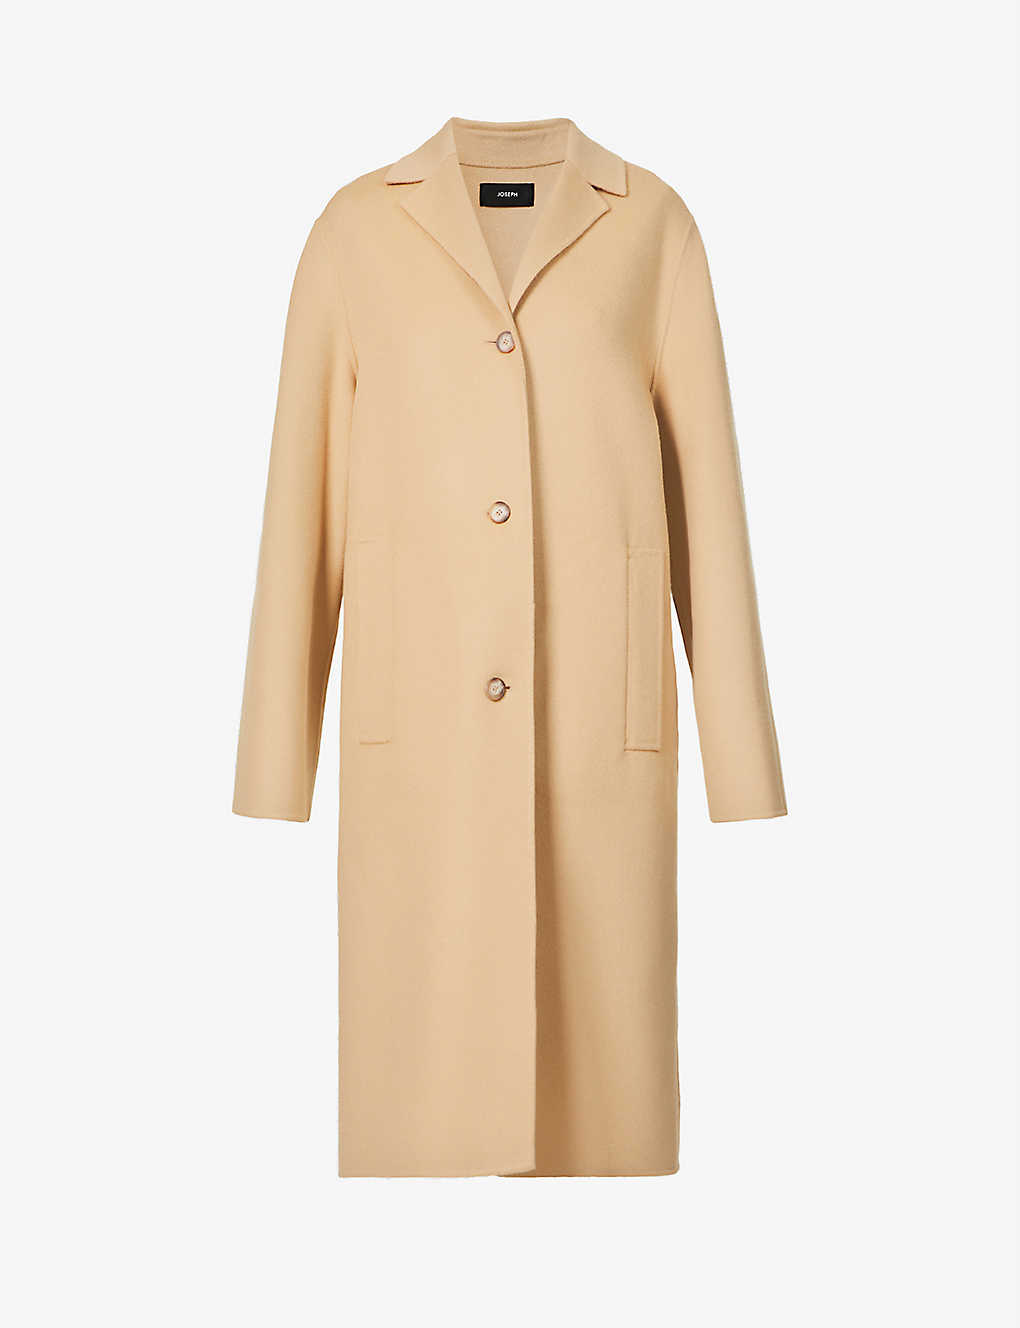 JOSEPH CAIA RELAXED-FIT WOOL AND CASHMERE-BLEND COAT